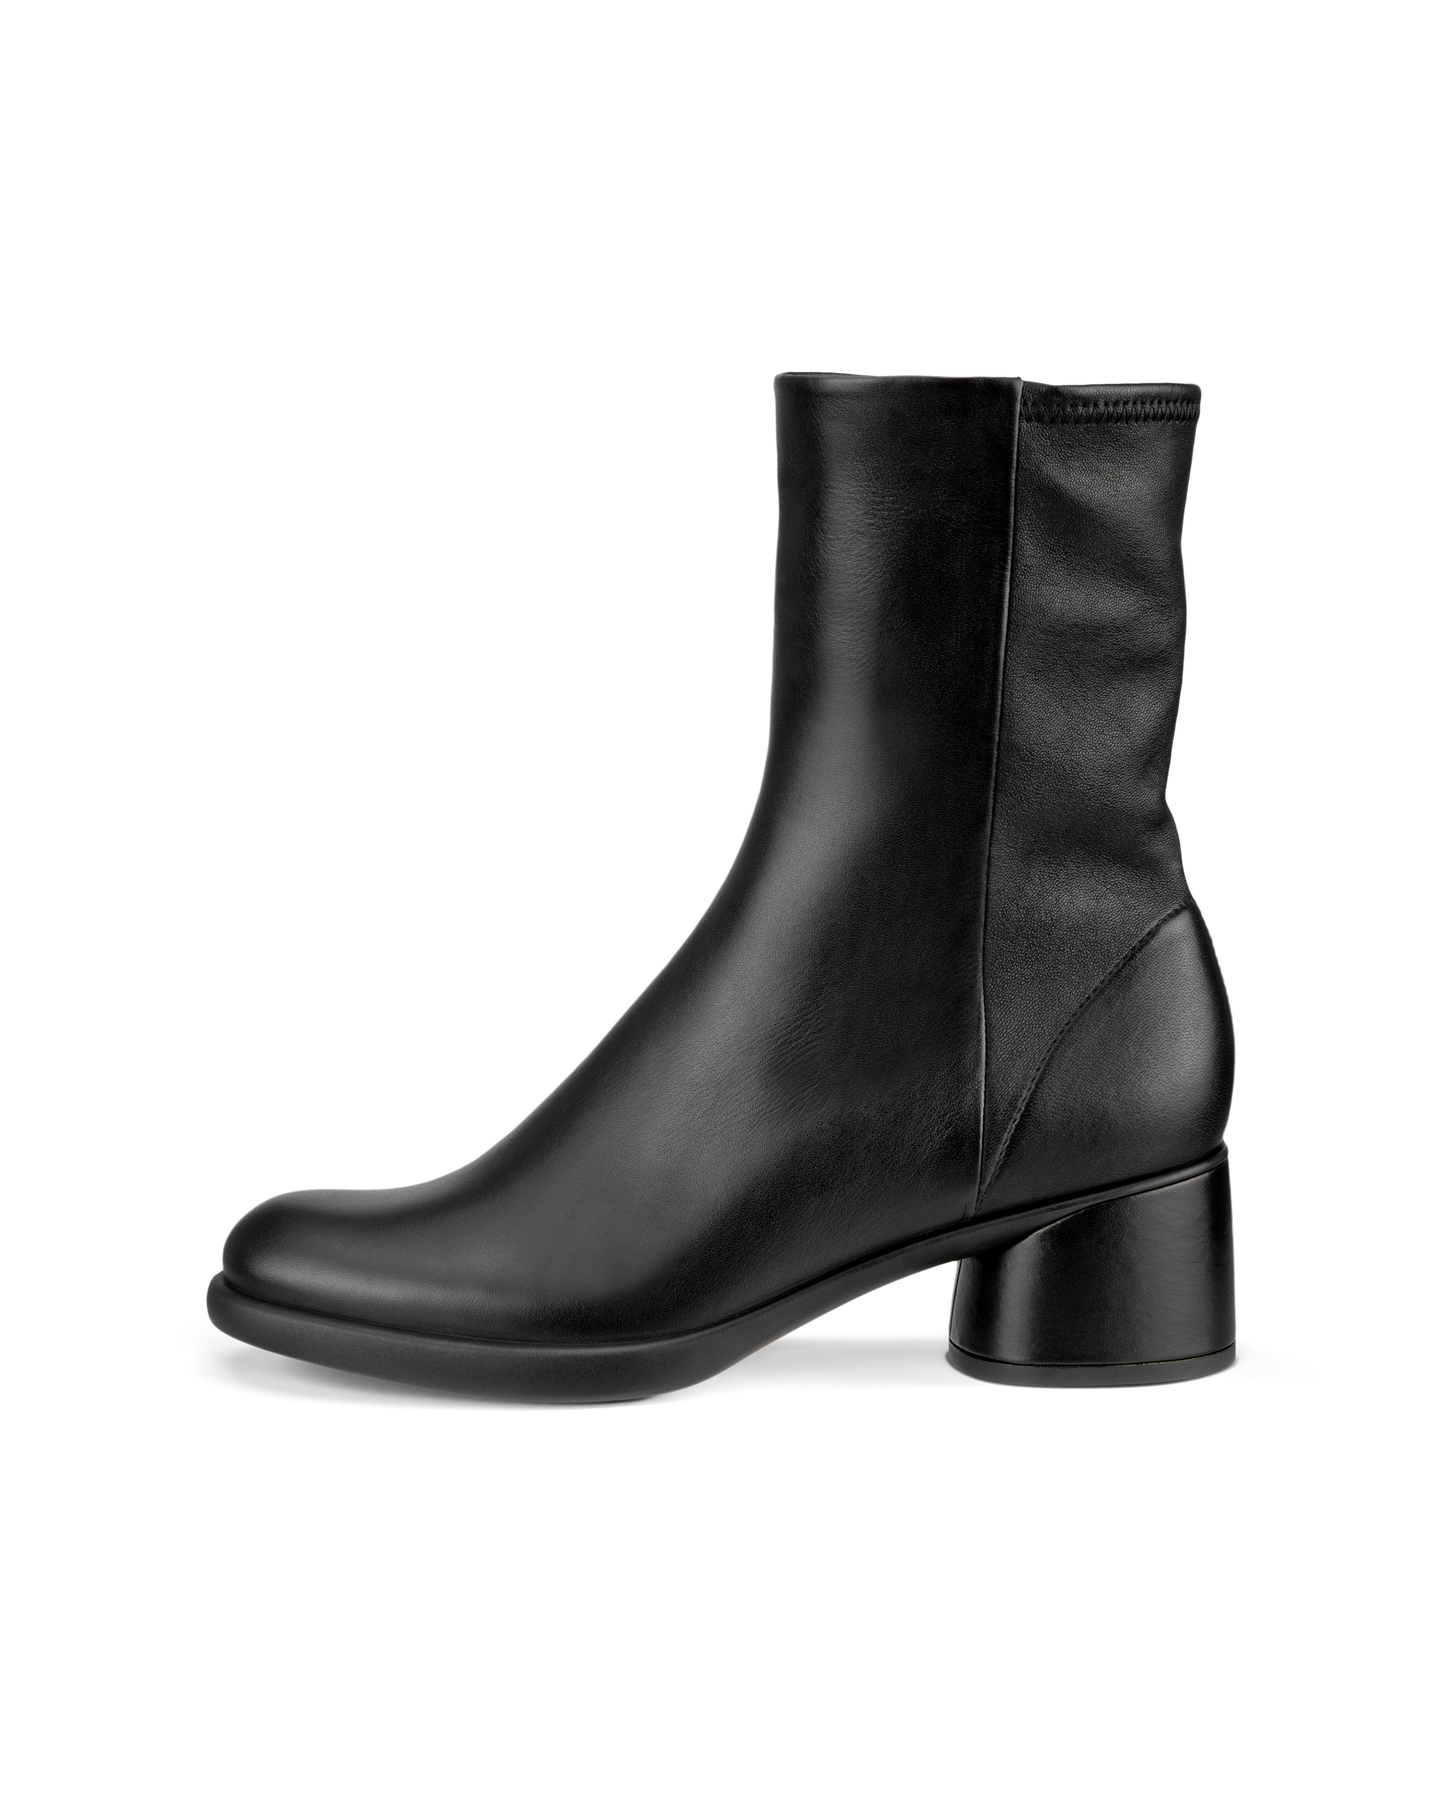 UPC 194891334723 product image for ECCO Women's Sculpted Lx 35 Mid-cut Boot Size 6 Leather Black | upcitemdb.com